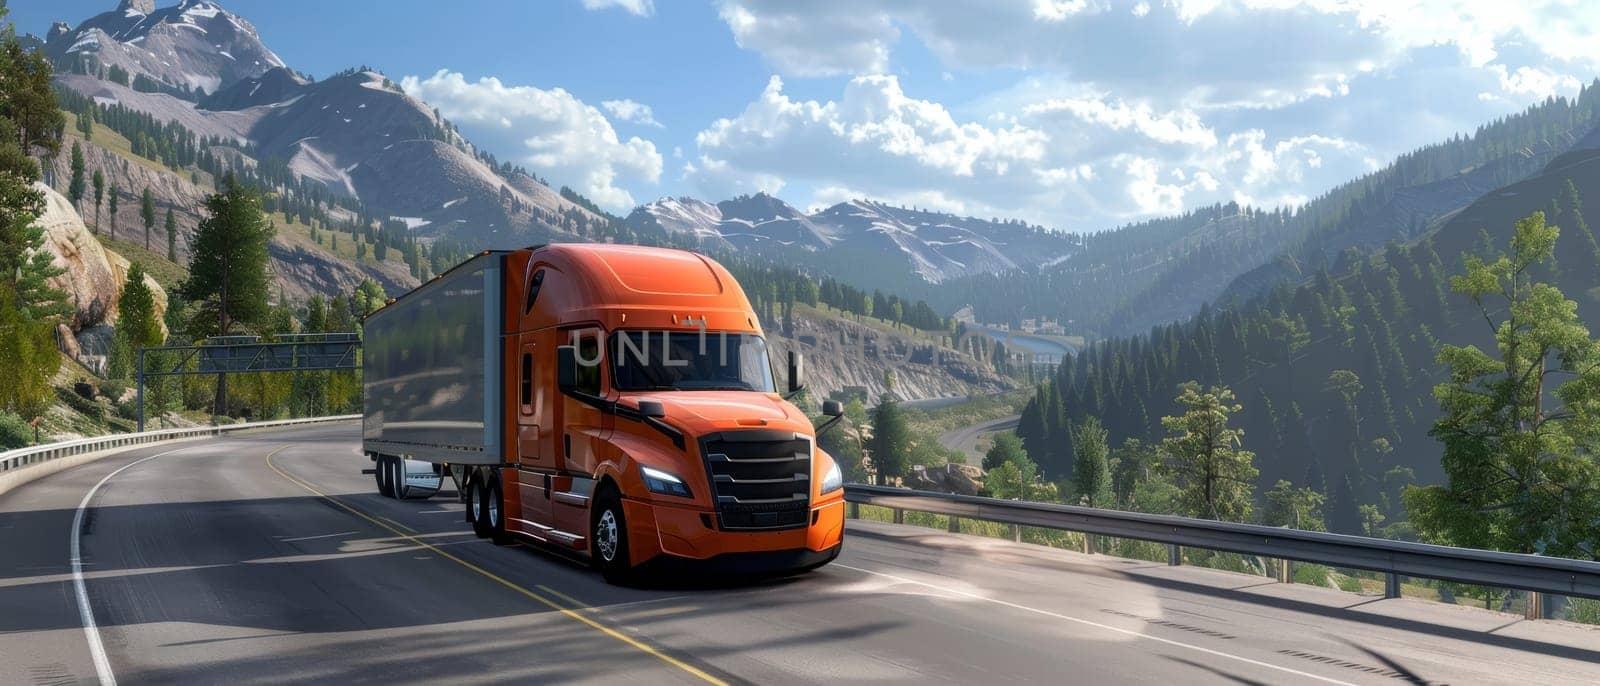 An orange semi truck with trailer travels on a highway winding through a scenic mountain landscape under a clear sky